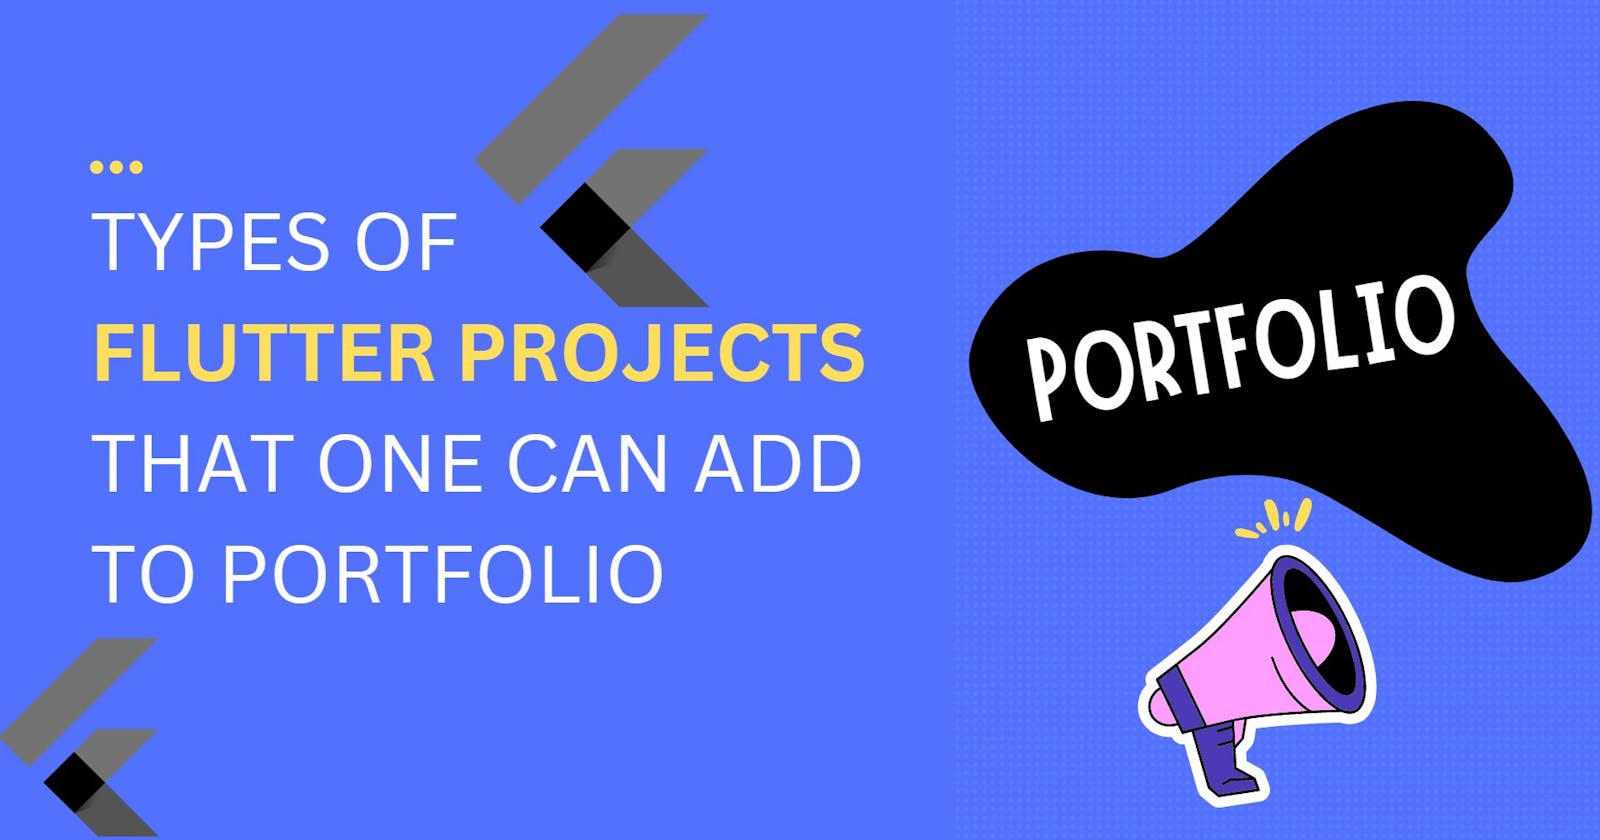 Types of Flutter Projects that one can add to a Portfolio or Resume